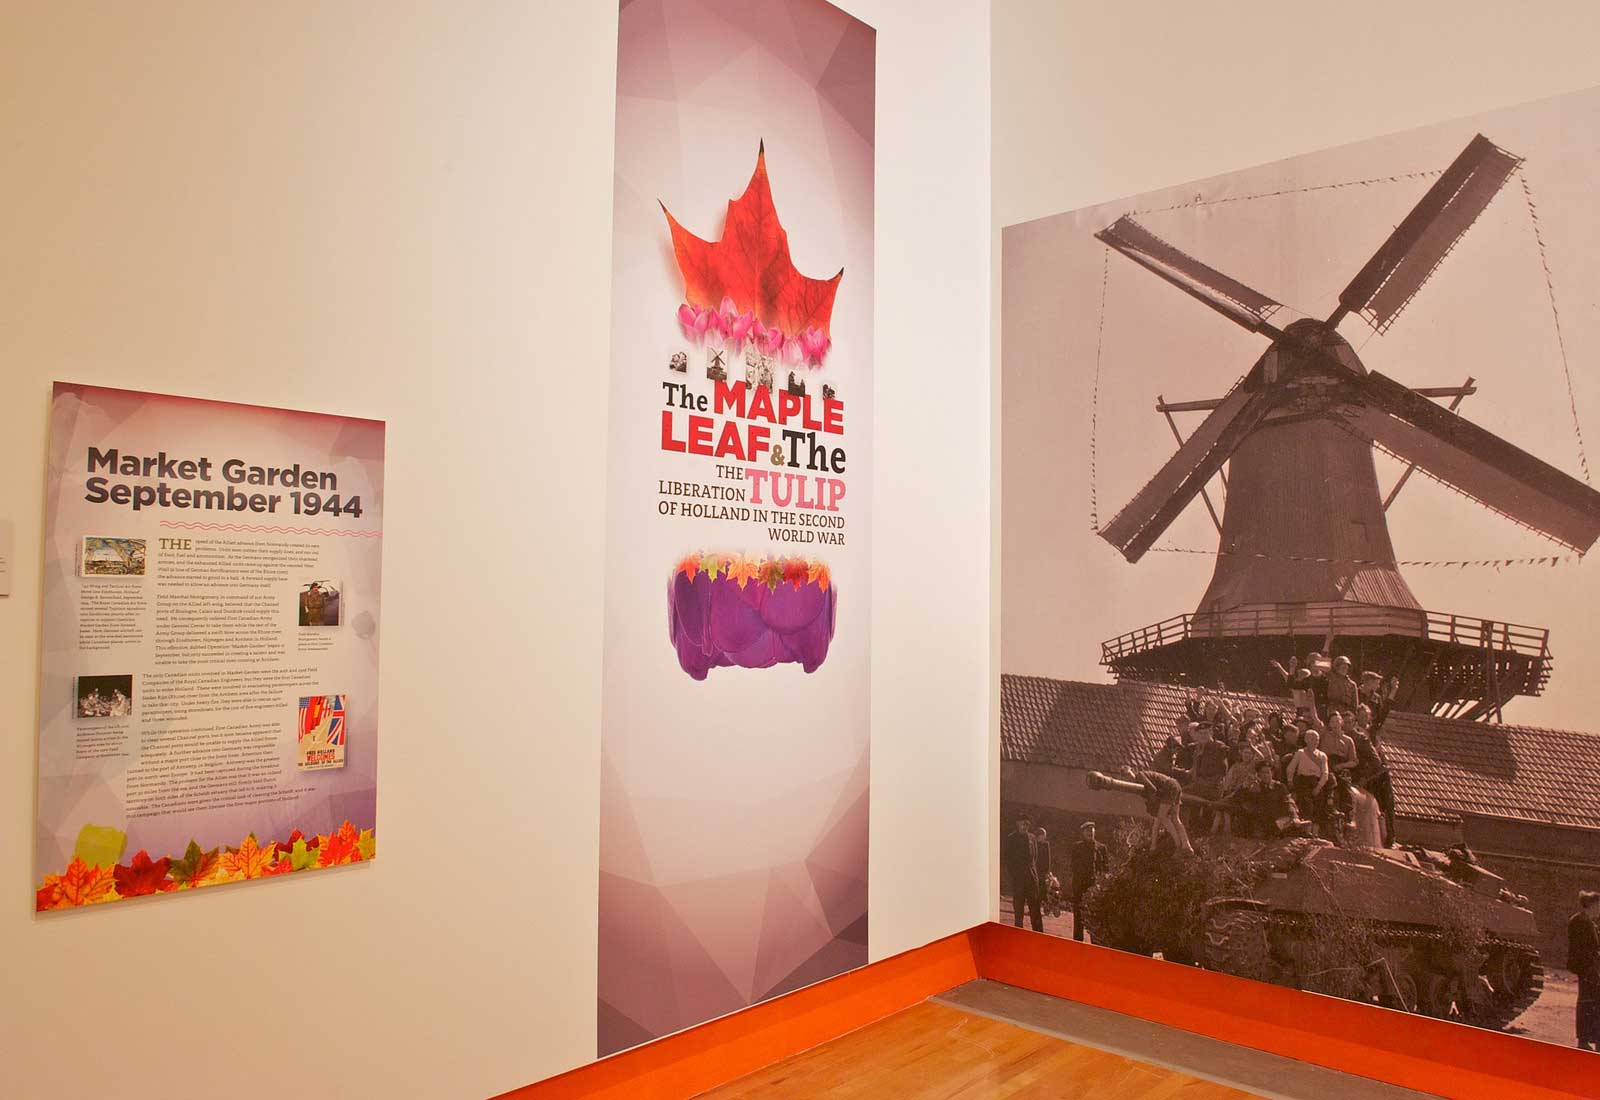 The Maple Leaf and the Tulip: The Liberation of Holland in the Second World War